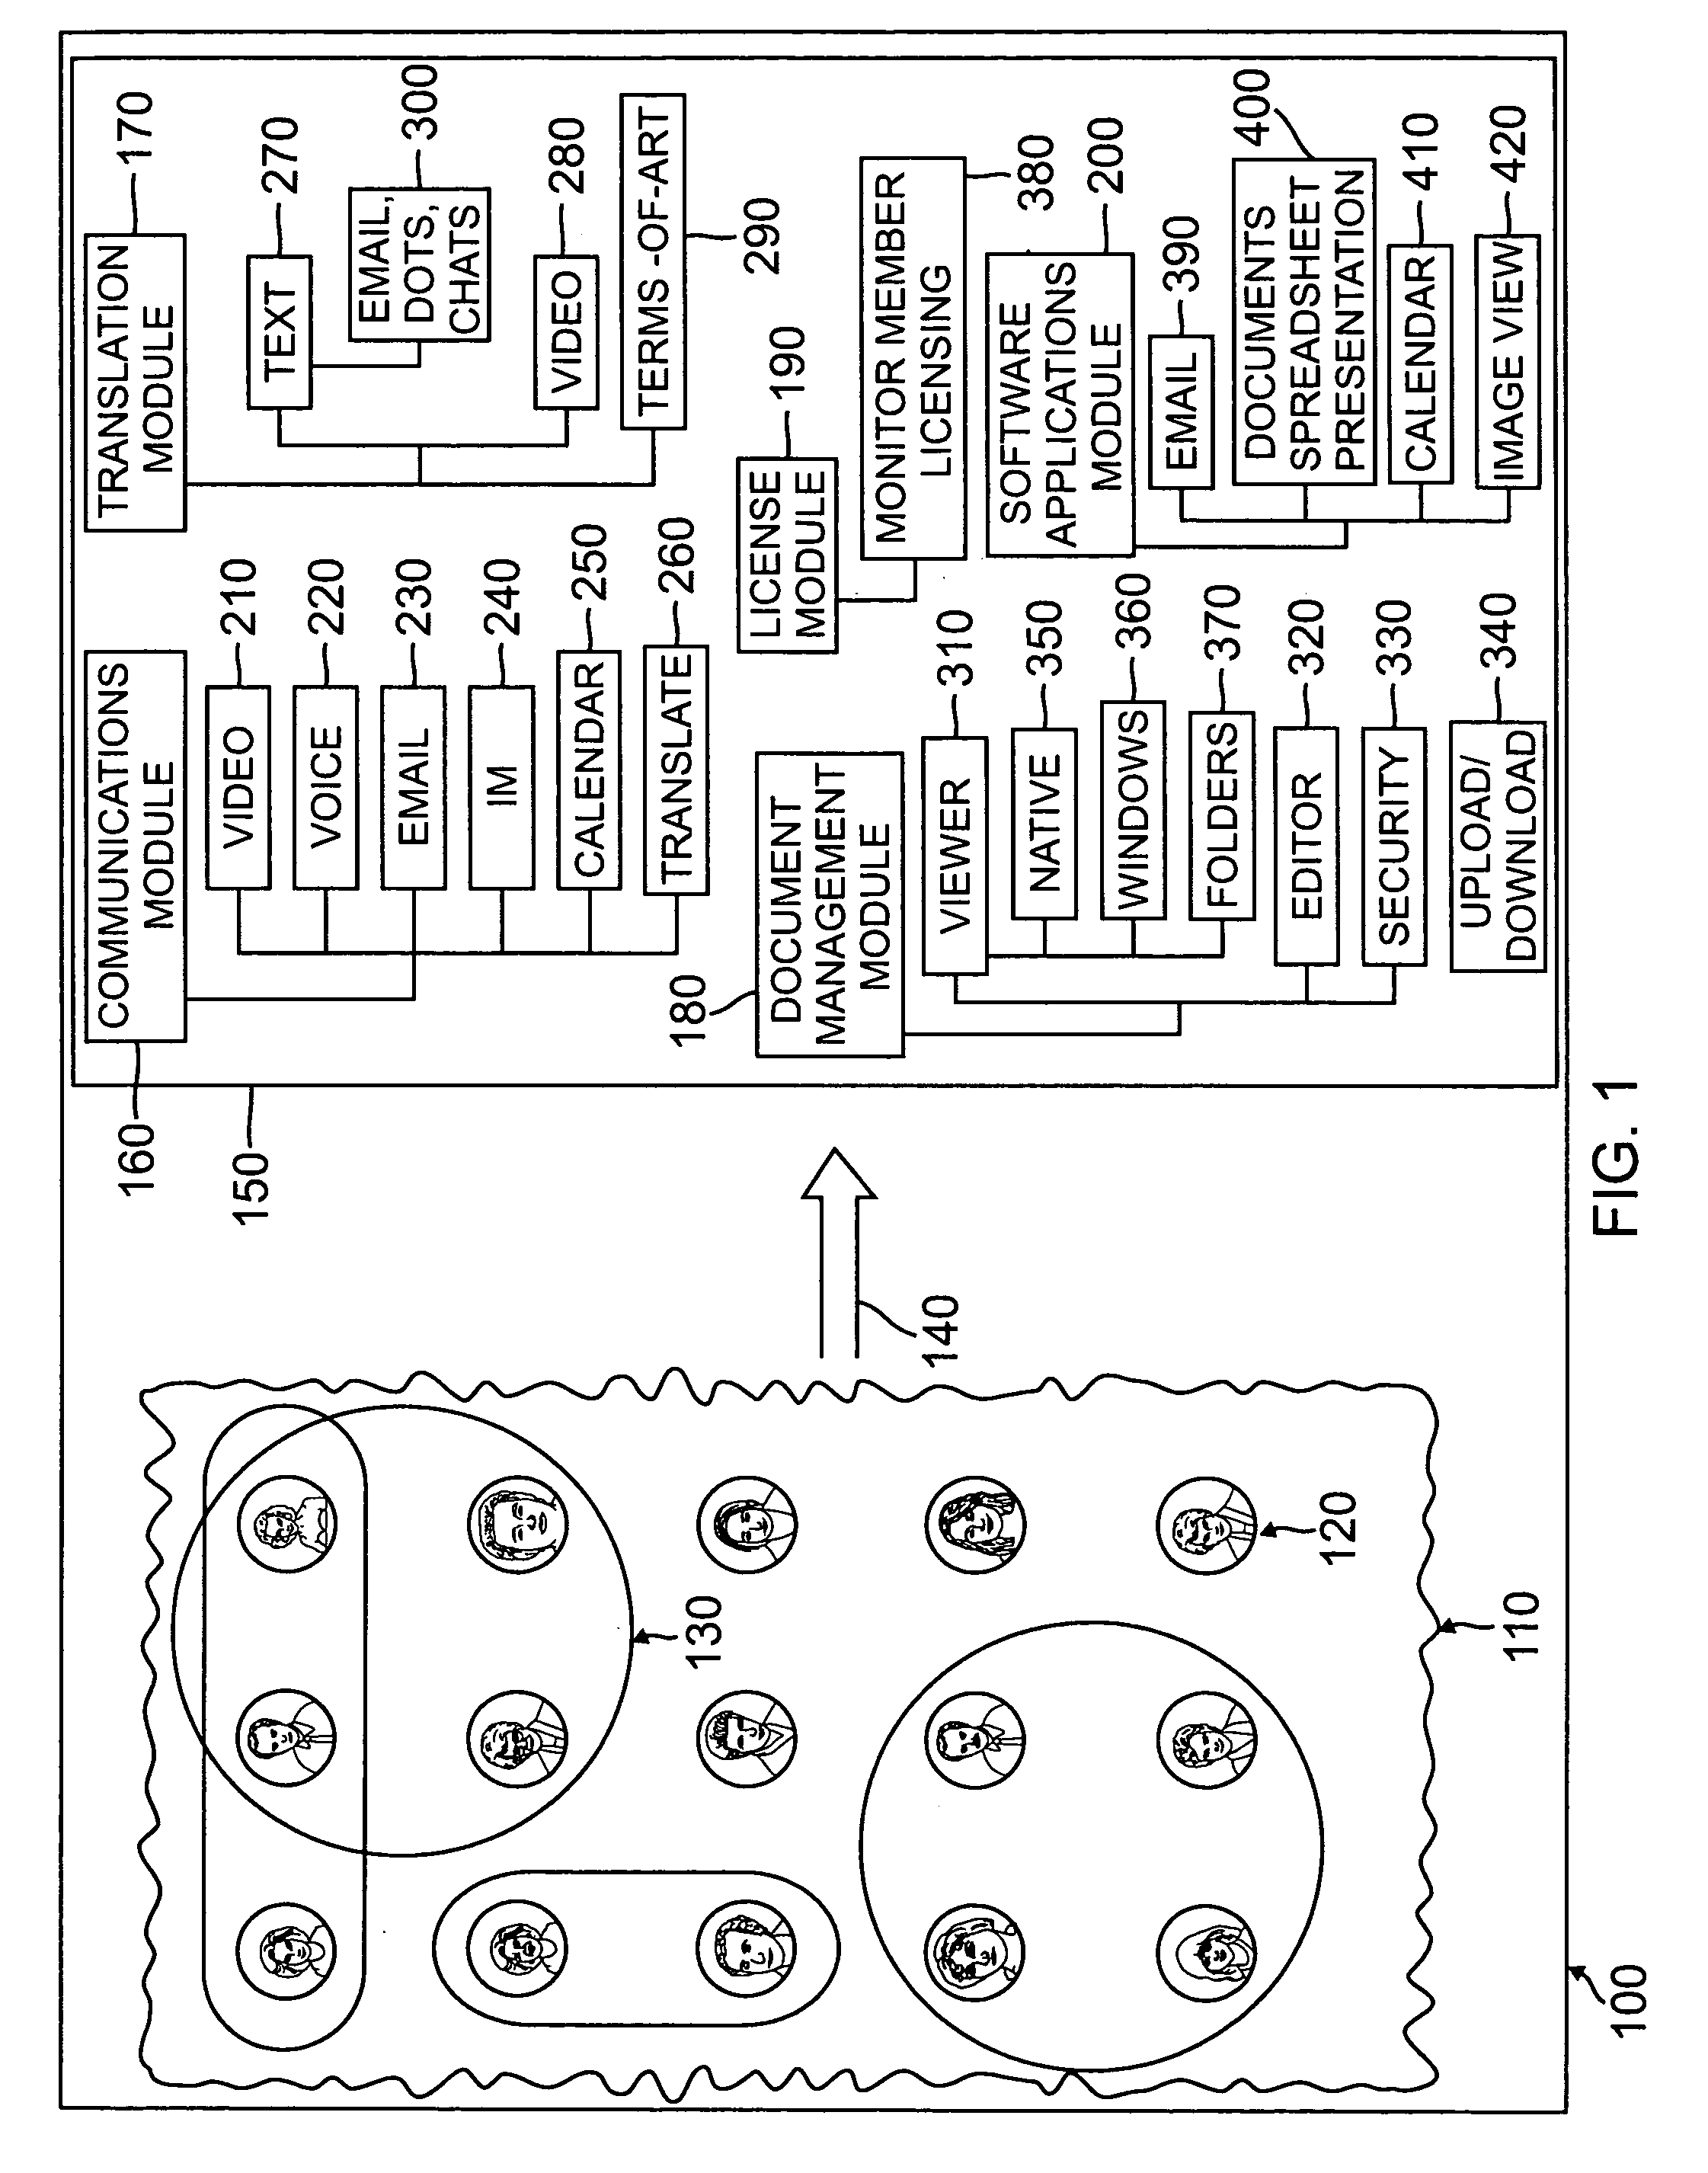 System and method for interactively collaborating within a secure online social networking community